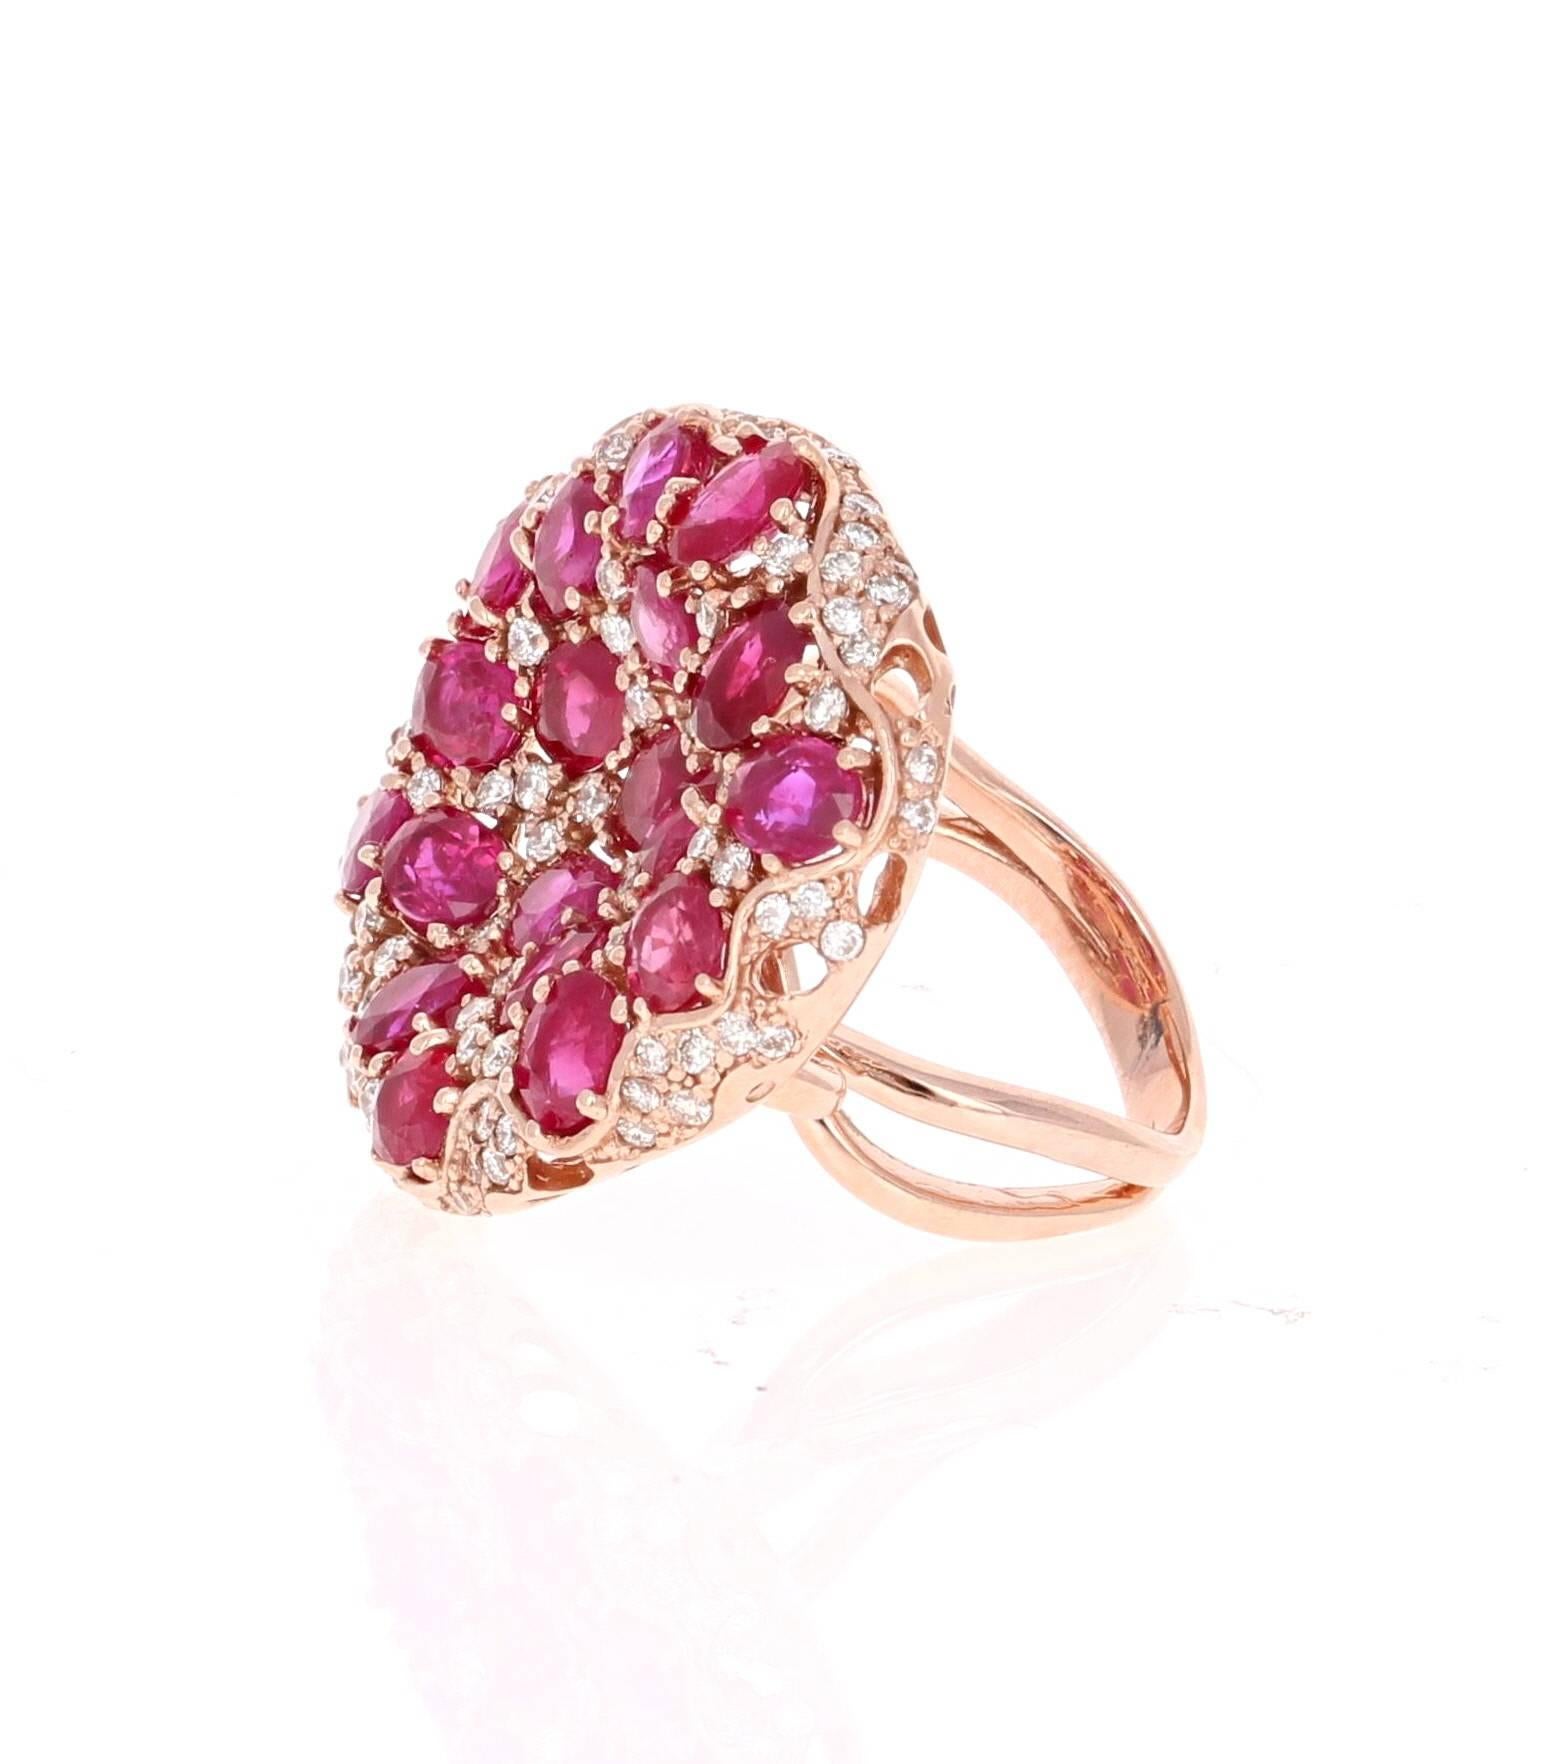 This gorgeous cocktail ring has 19 Oval cut Rubies set in the center of the ring that weigh 7.58 carats.  It also has 90 Round Cut Diamonds floating around the Rubies that weigh 1.02 carats. (Clarity: VS2, Color: H).  The total carat weight of the